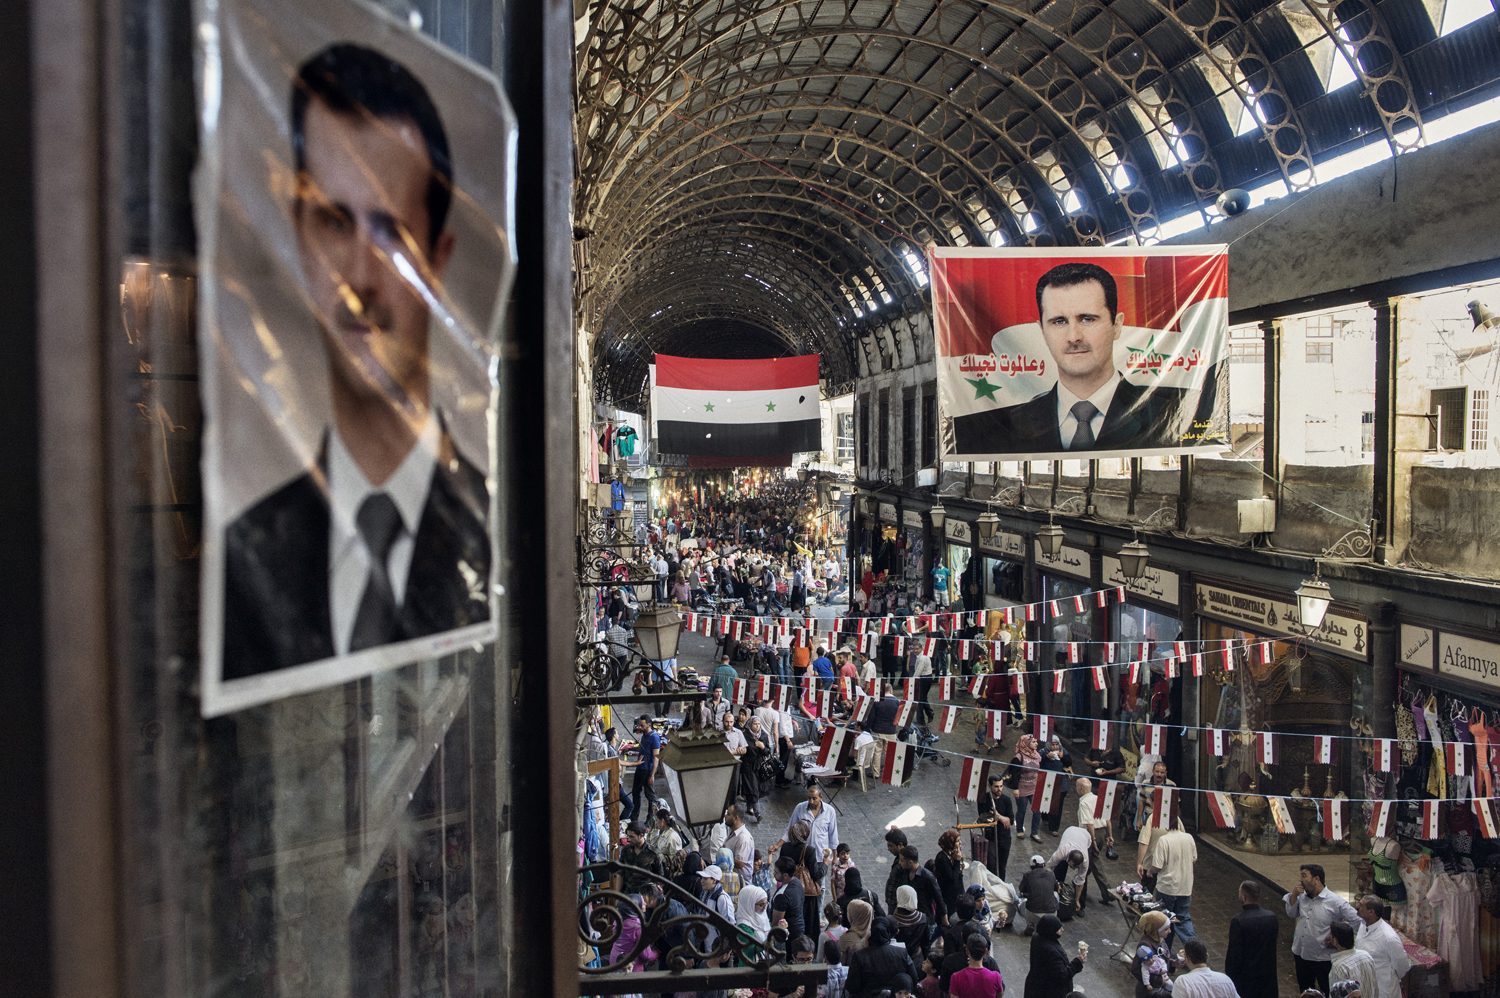 Election banners promoting Assad in upcoming presidential elections, in Damascus' covered market, May 15, 2014.